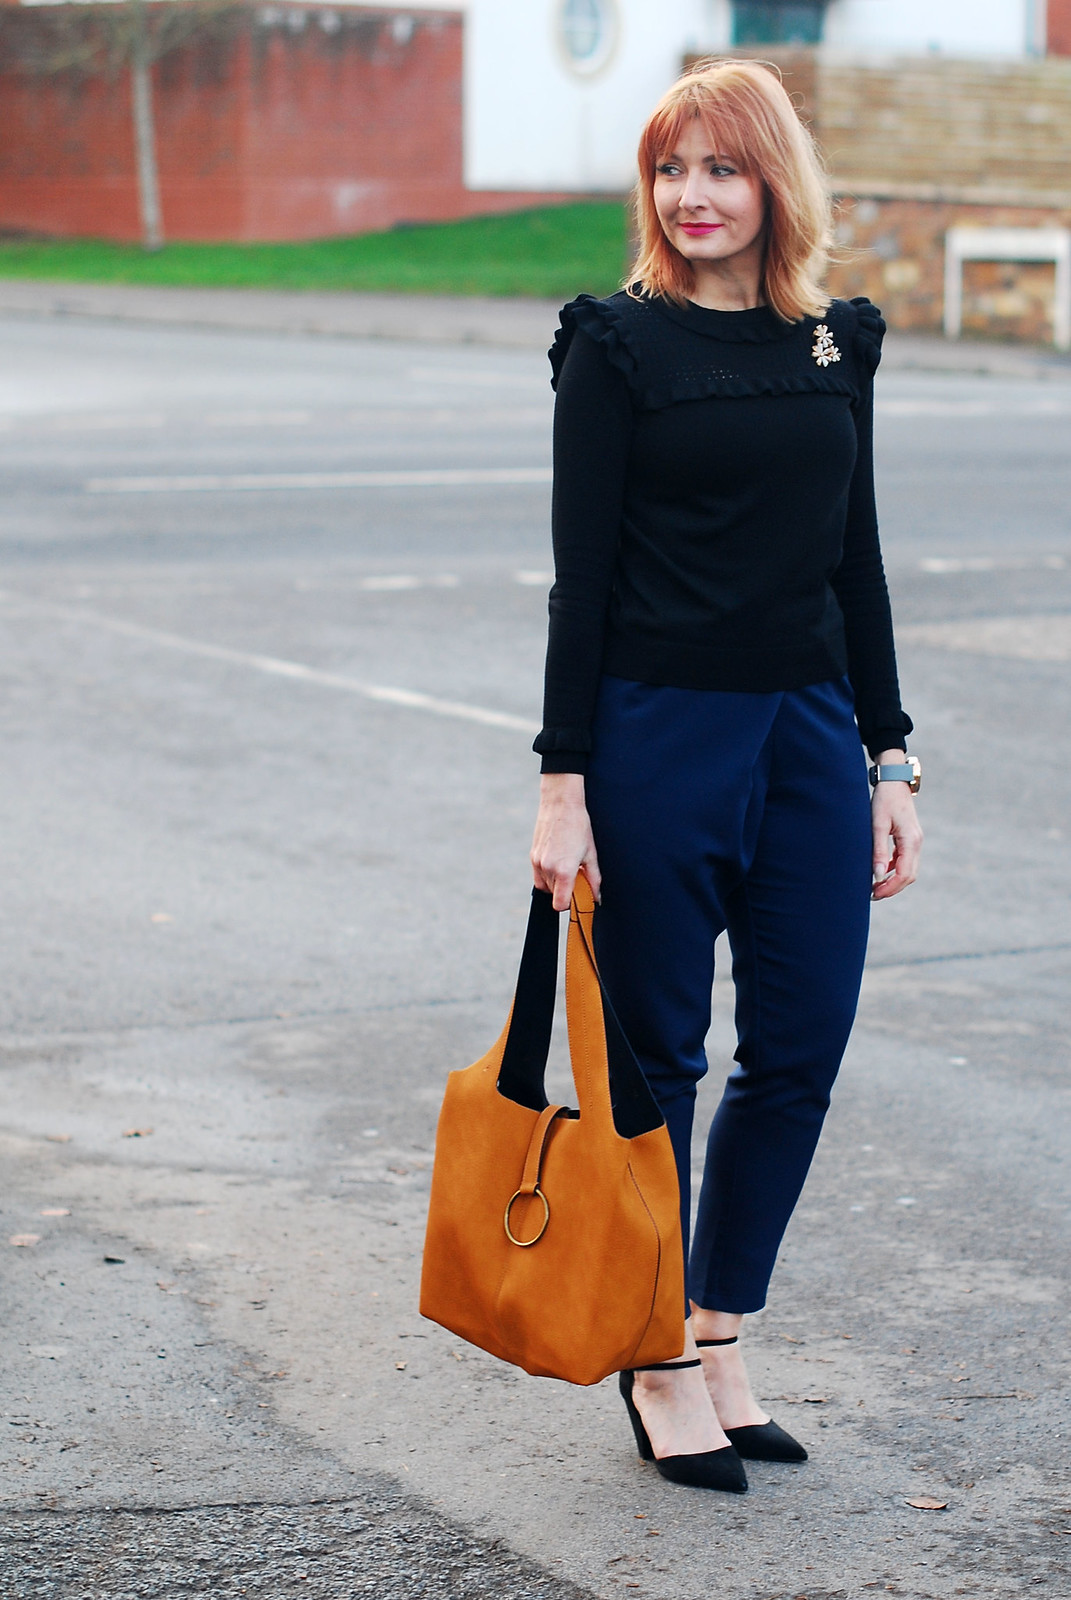 Navy and black together: Navy peg leg trousers black ruffled sweater black pointed heels mustard bucket bag | Not Dressed As Lamb, over 40 style